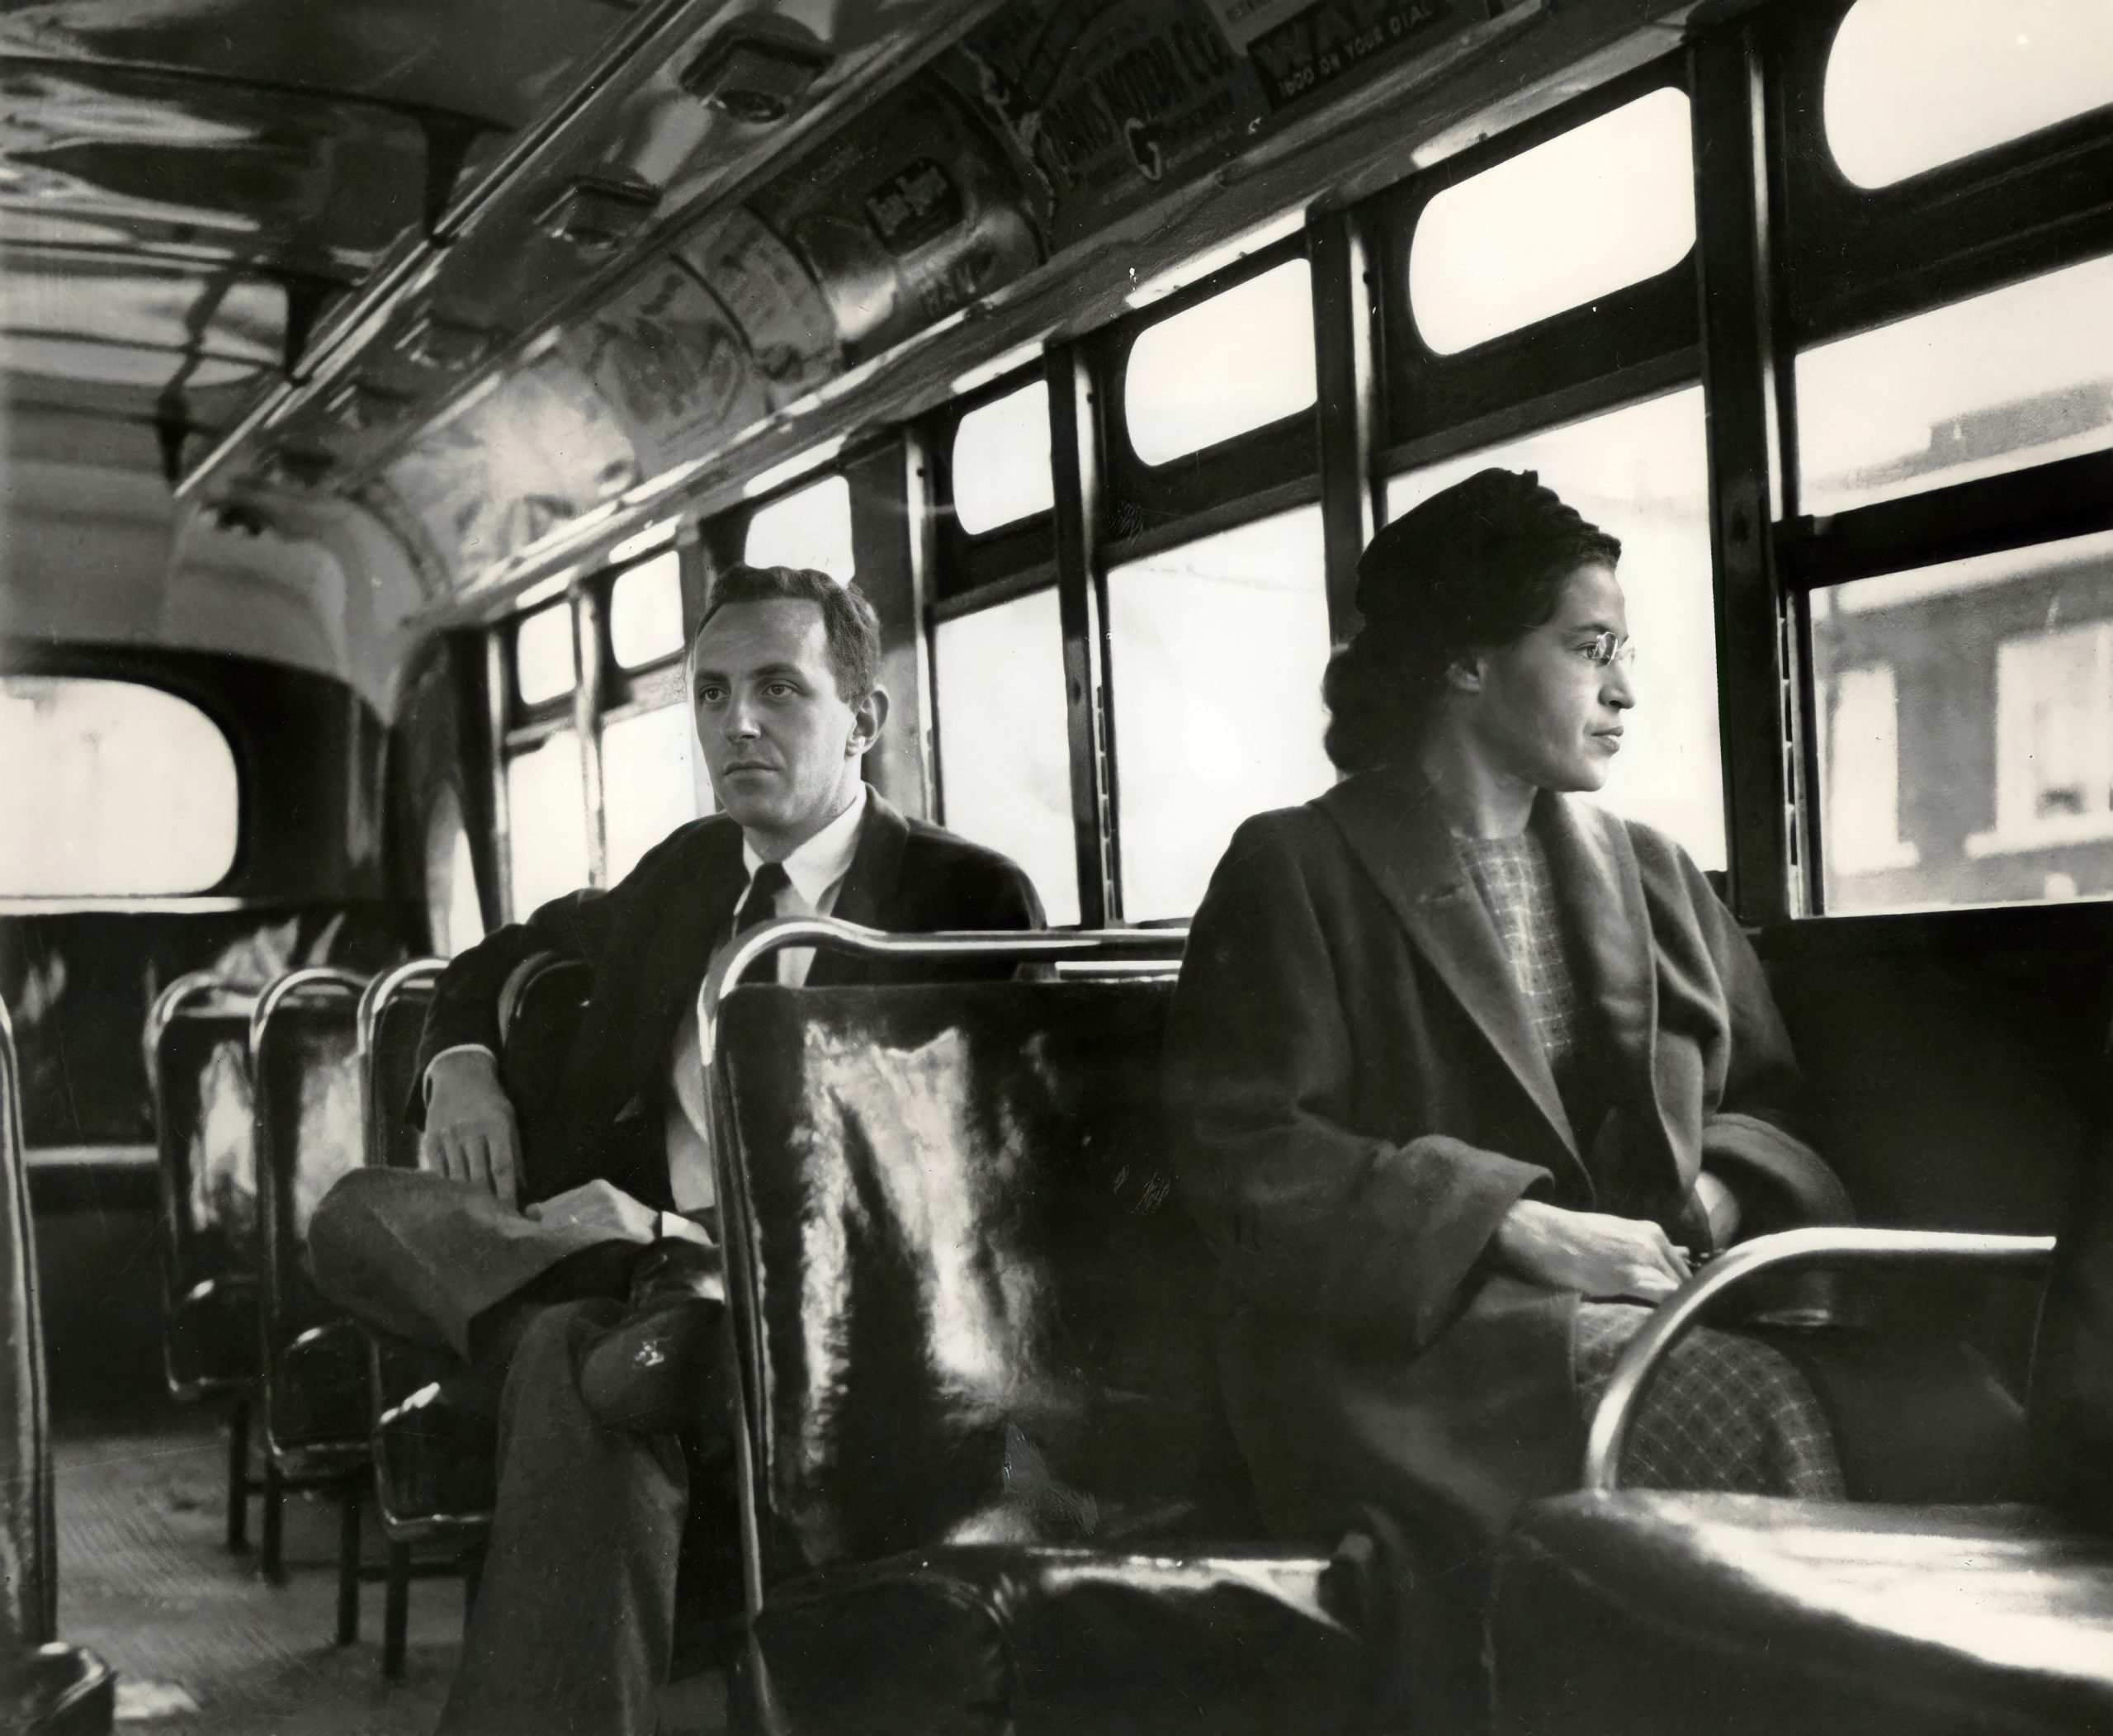 best biography of rosa parks